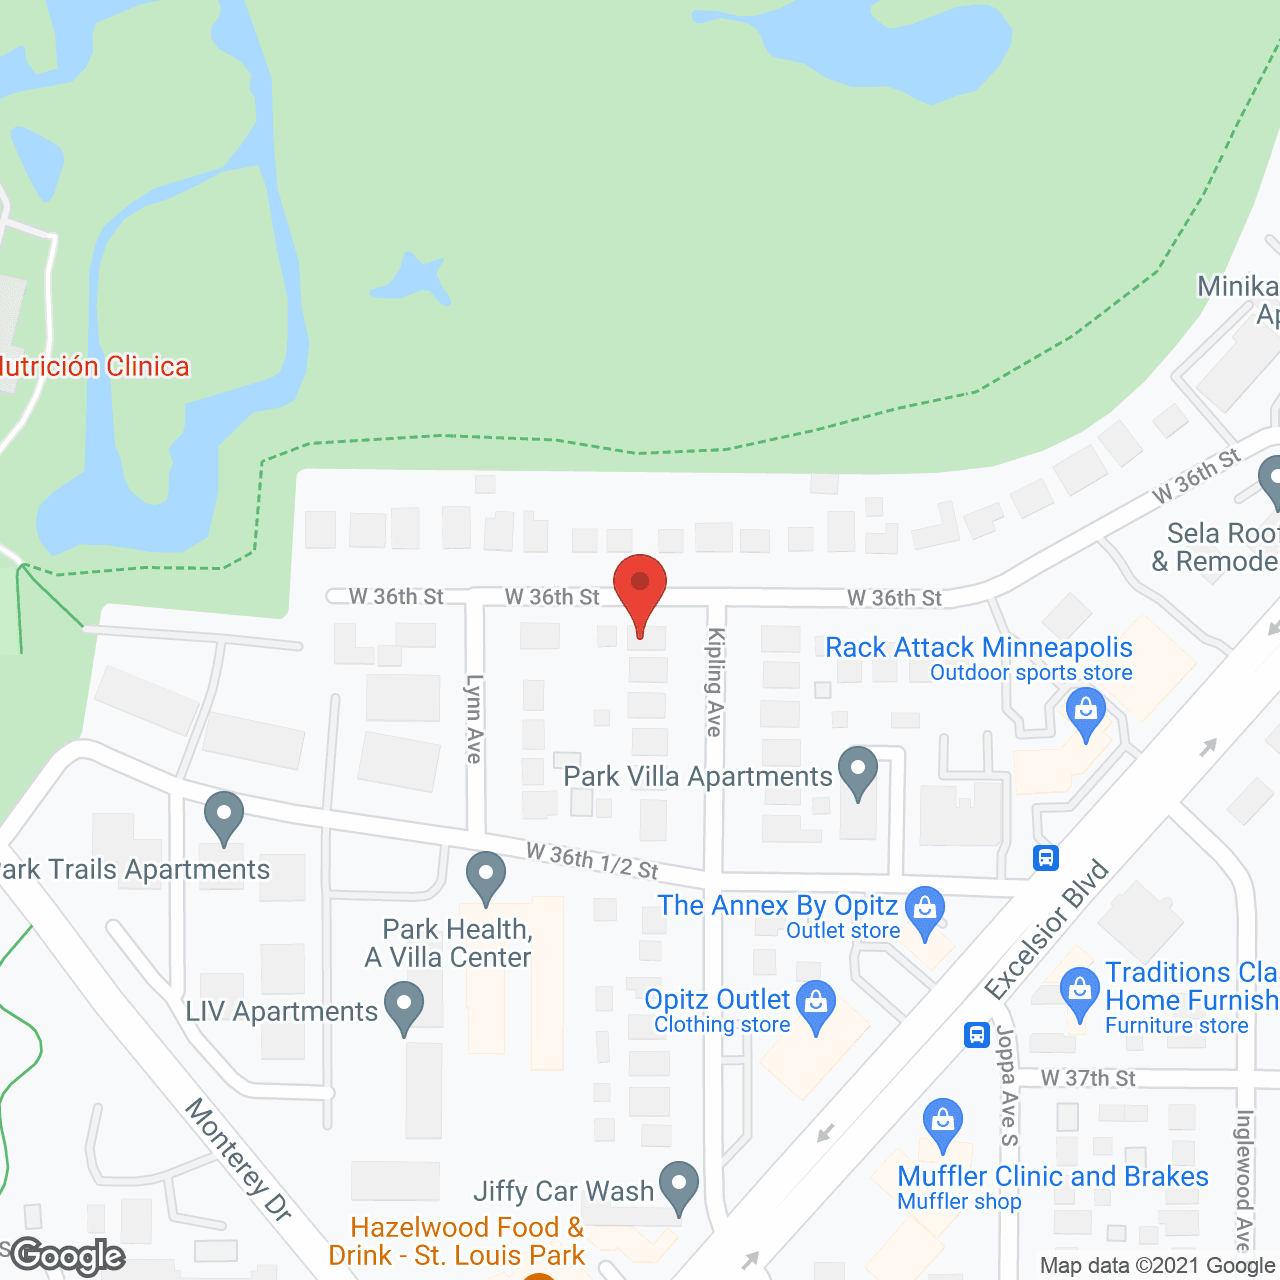 Park Health and Rehab Ctr in google map